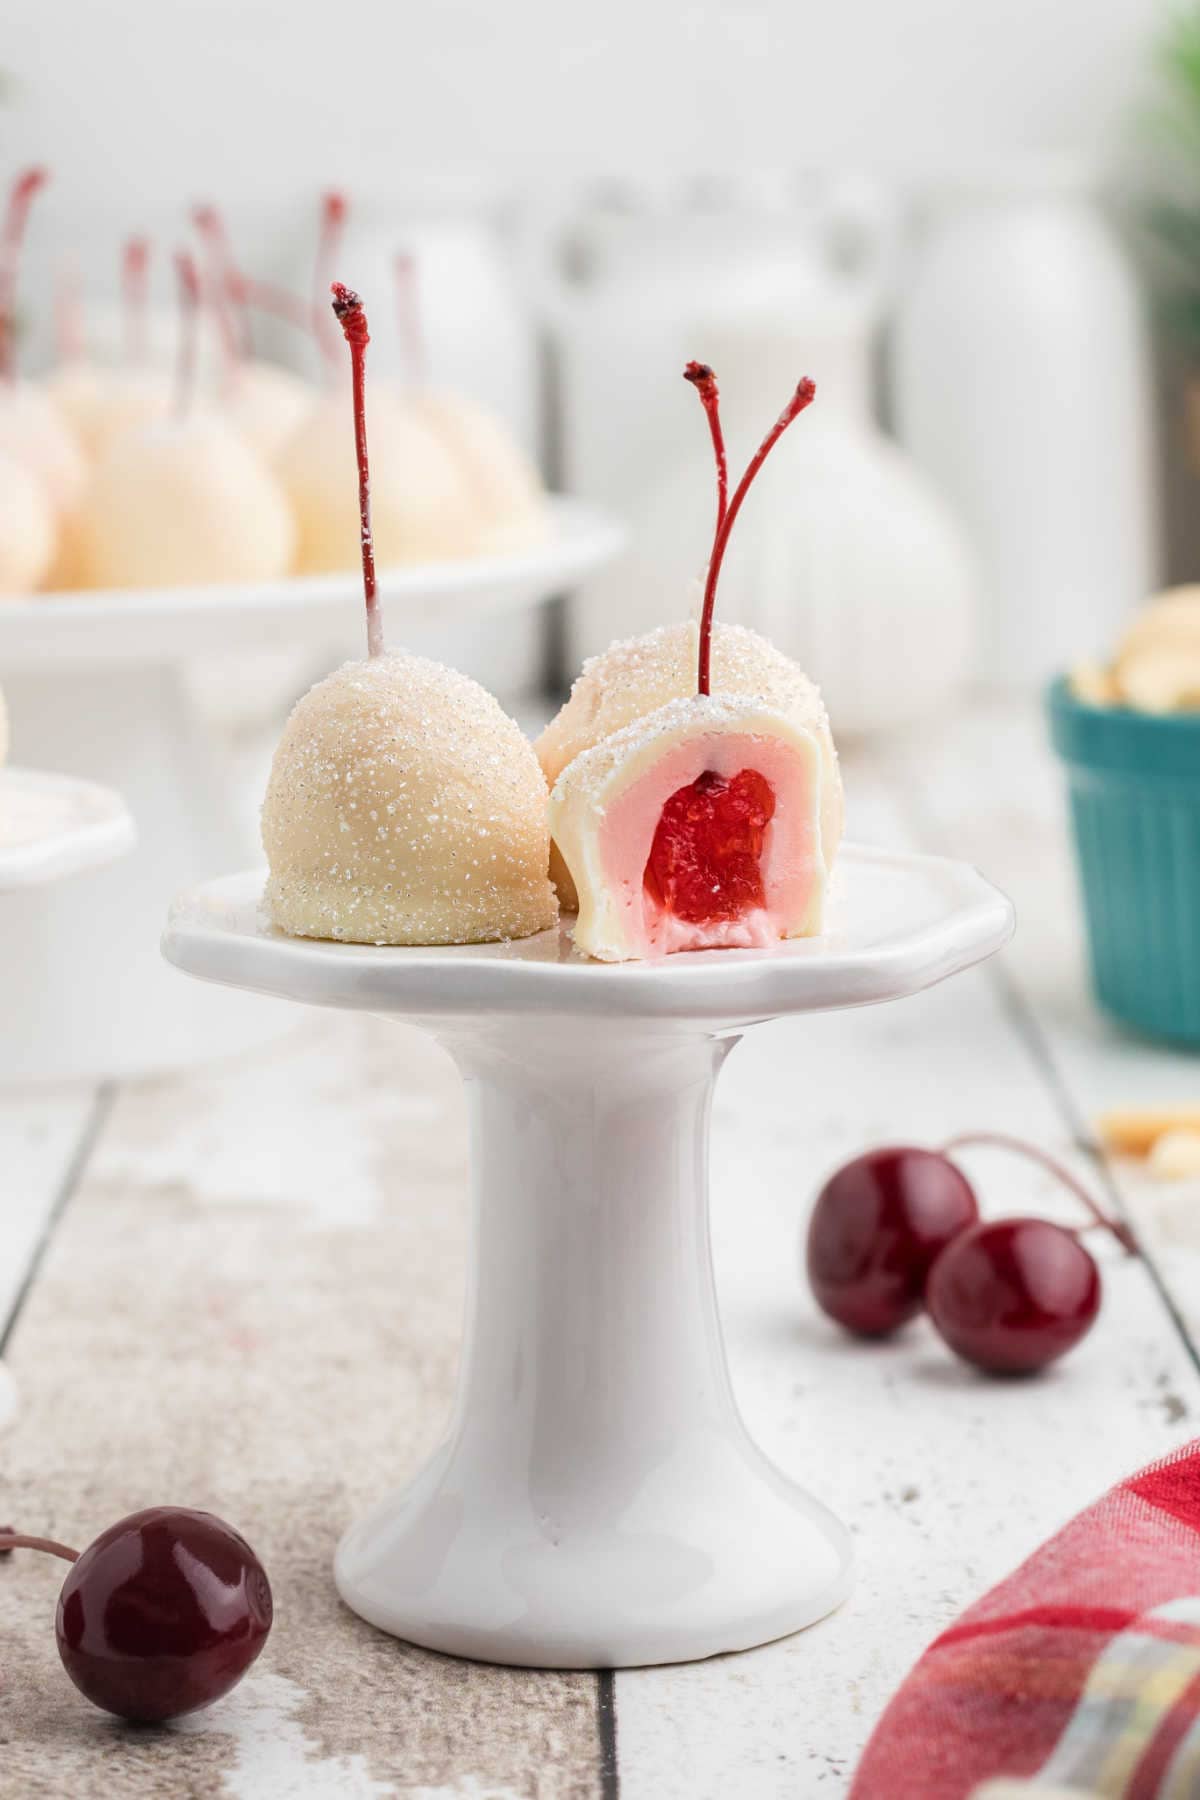 White chocolate covered cherries on a white cakeplate.